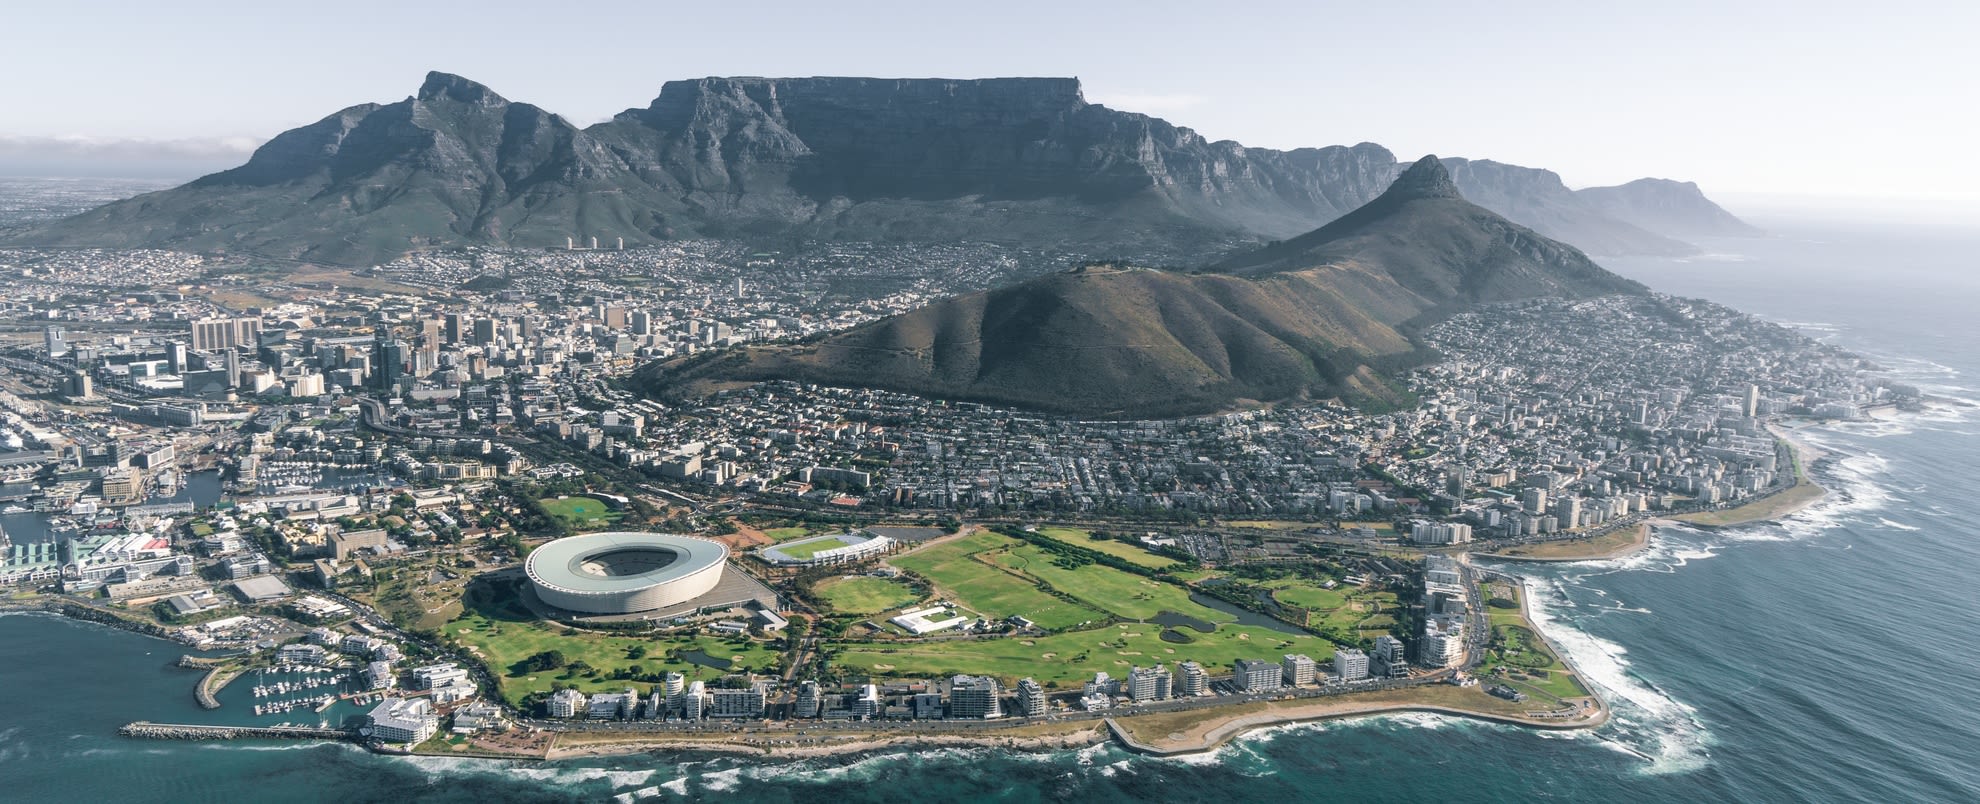 Ariel view above of Cape Town in the daytime.

